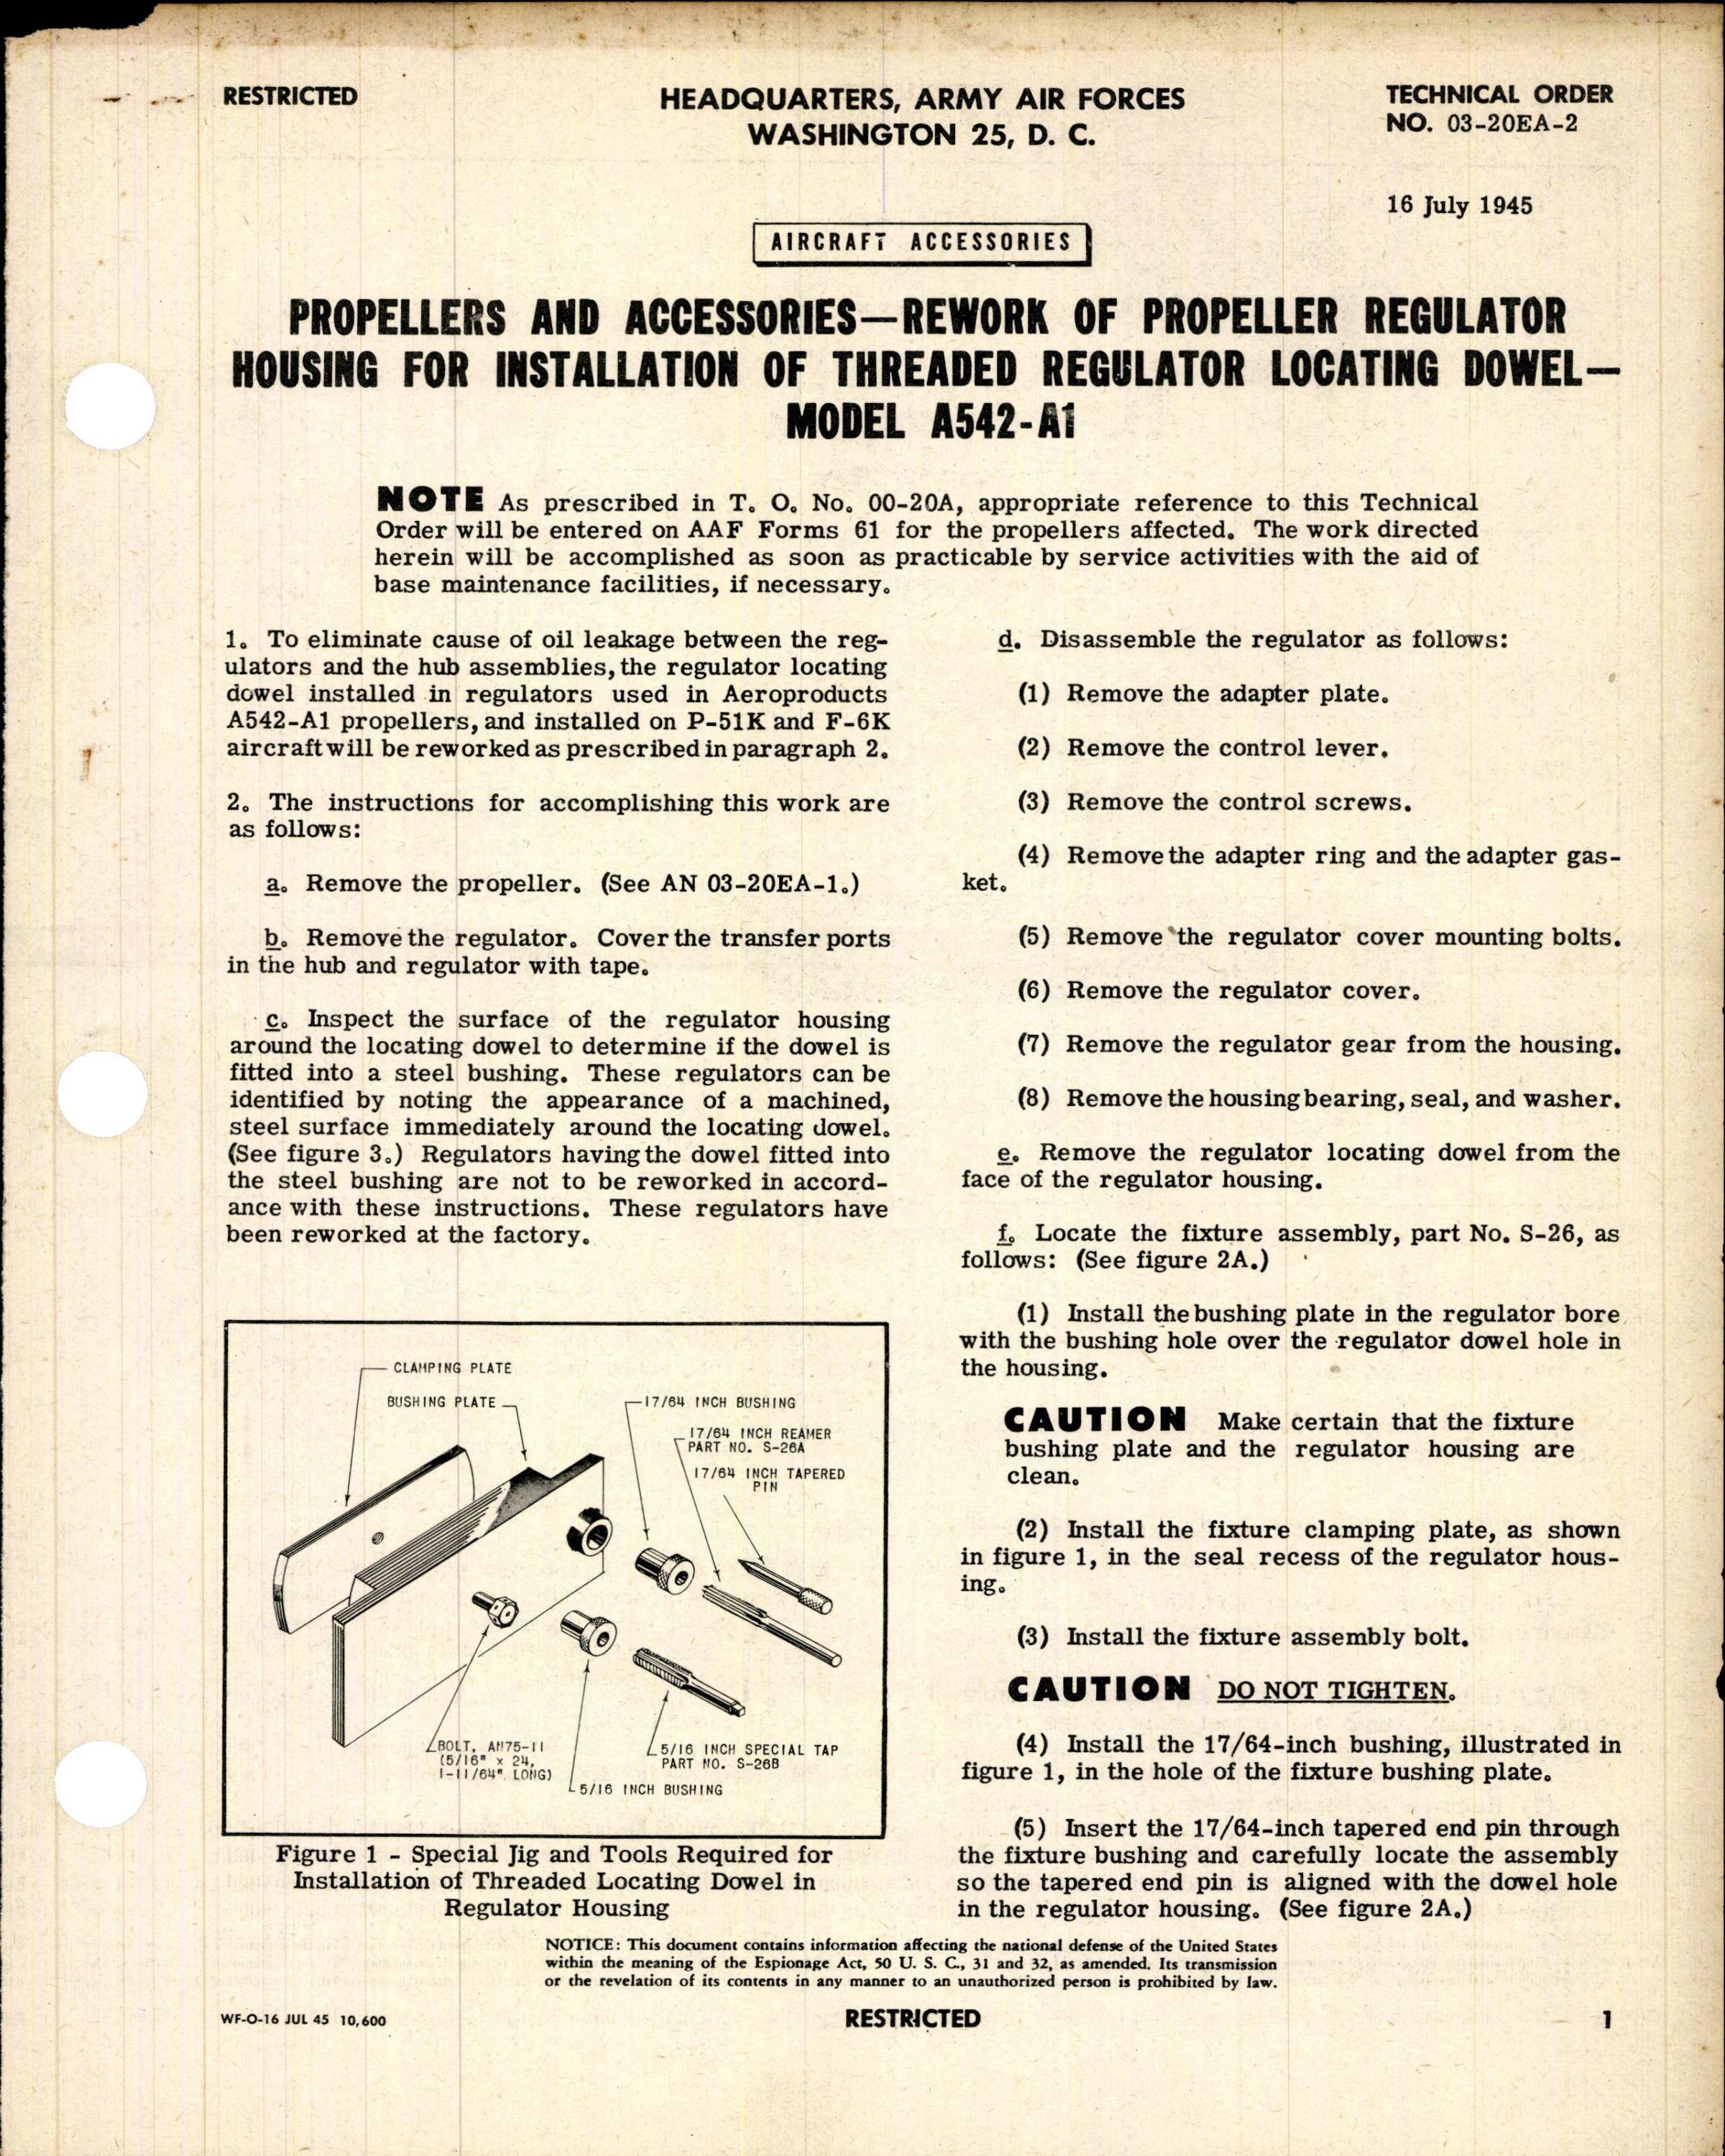 Sample page 1 from AirCorps Library document: Rework of Propeller Regulator Housing and Installation of Threaded Regulator Locating Dowel